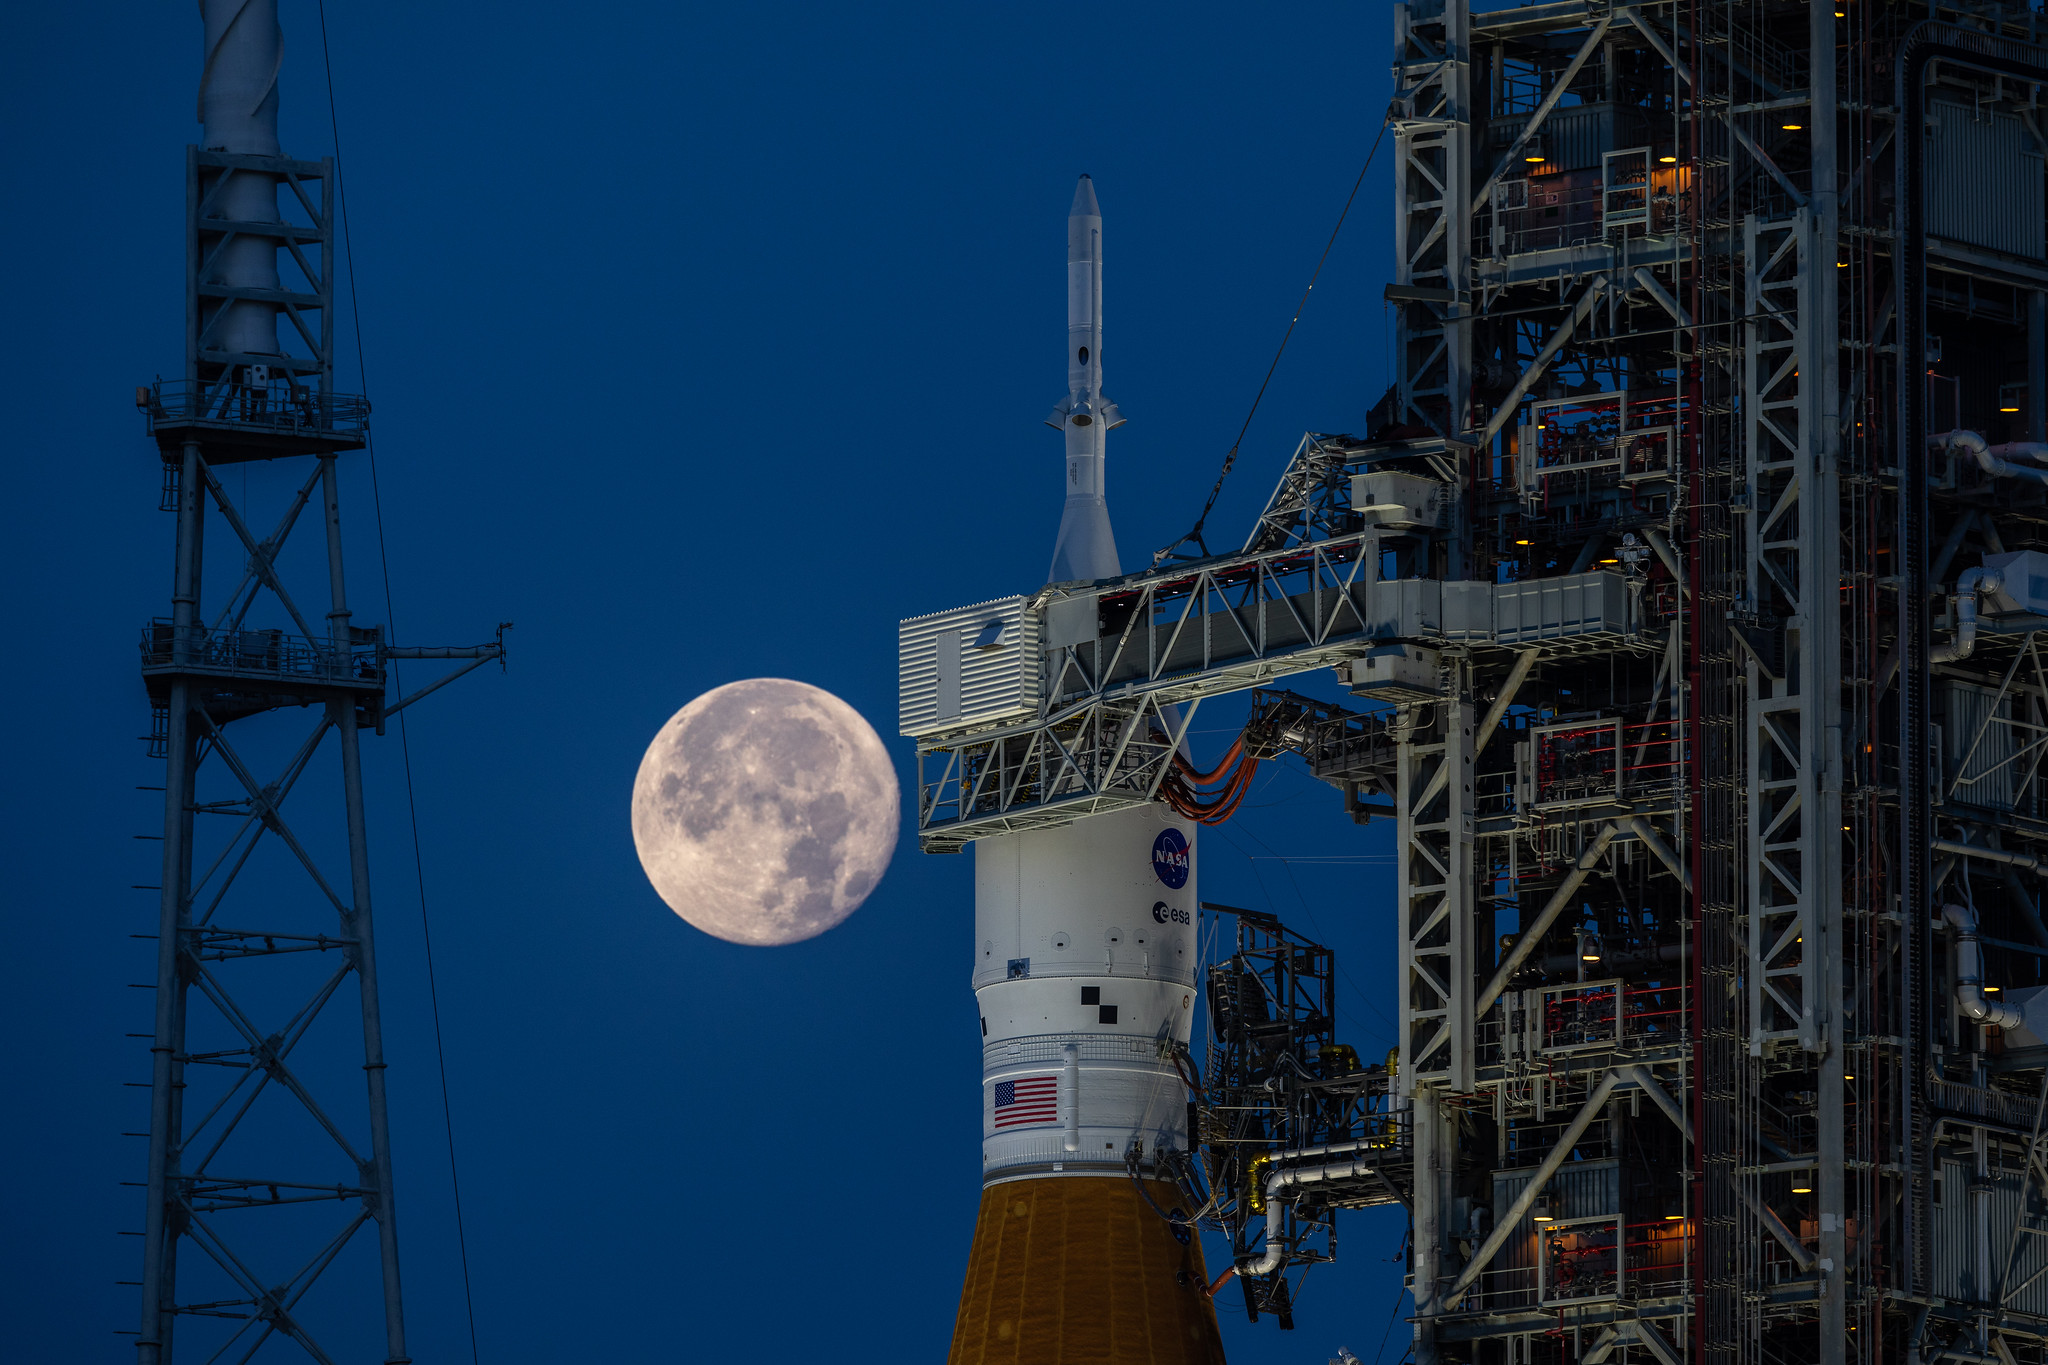 A full Moon in view on June 14, 2022 behind the Space Launch System and Orion spacecraft atop the mobile launcher at Launch Complex 39B at NASA’s Kennedy Space Center in Florida.